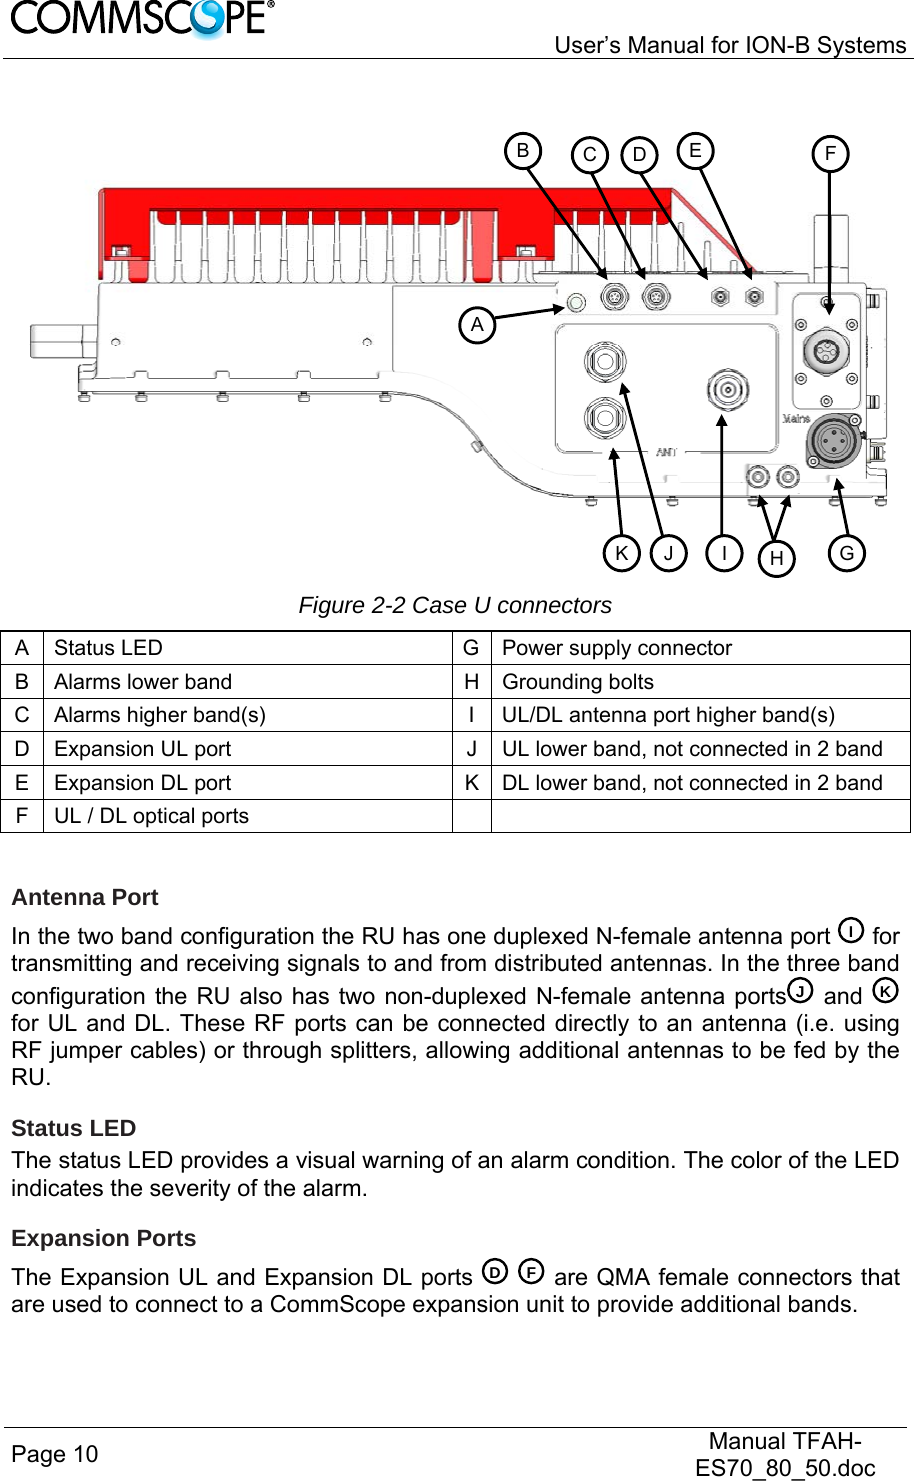   User’s Manual for ION-B Systems Page 10   Manual TFAH-ES70_80_50.doc      Figure 2-2 Case U connectors A  Status LED  G Power supply connector B Alarms lower band  H Grounding bolts C  Alarms higher band(s)  I  UL/DL antenna port higher band(s) D  Expansion UL port  J  UL lower band, not connected in 2 band E  Expansion DL port  K  DL lower band, not connected in 2 band F  UL / DL optical ports      Antenna Port In the two band configuration the RU has one duplexed N-female antenna port   for transmitting and receiving signals to and from distributed antennas. In the three band configuration the RU also has two non-duplexed N-female antenna ports  and   for UL and DL. These RF ports can be connected directly to an antenna (i.e. using RF jumper cables) or through splitters, allowing additional antennas to be fed by the RU. Status LED The status LED provides a visual warning of an alarm condition. The color of the LED indicates the severity of the alarm. Expansion Ports The Expansion UL and Expansion DL ports     are QMA female connectors that are used to connect to a CommScope expansion unit to provide additional bands. KJ FDIABC D EH  GI JF K